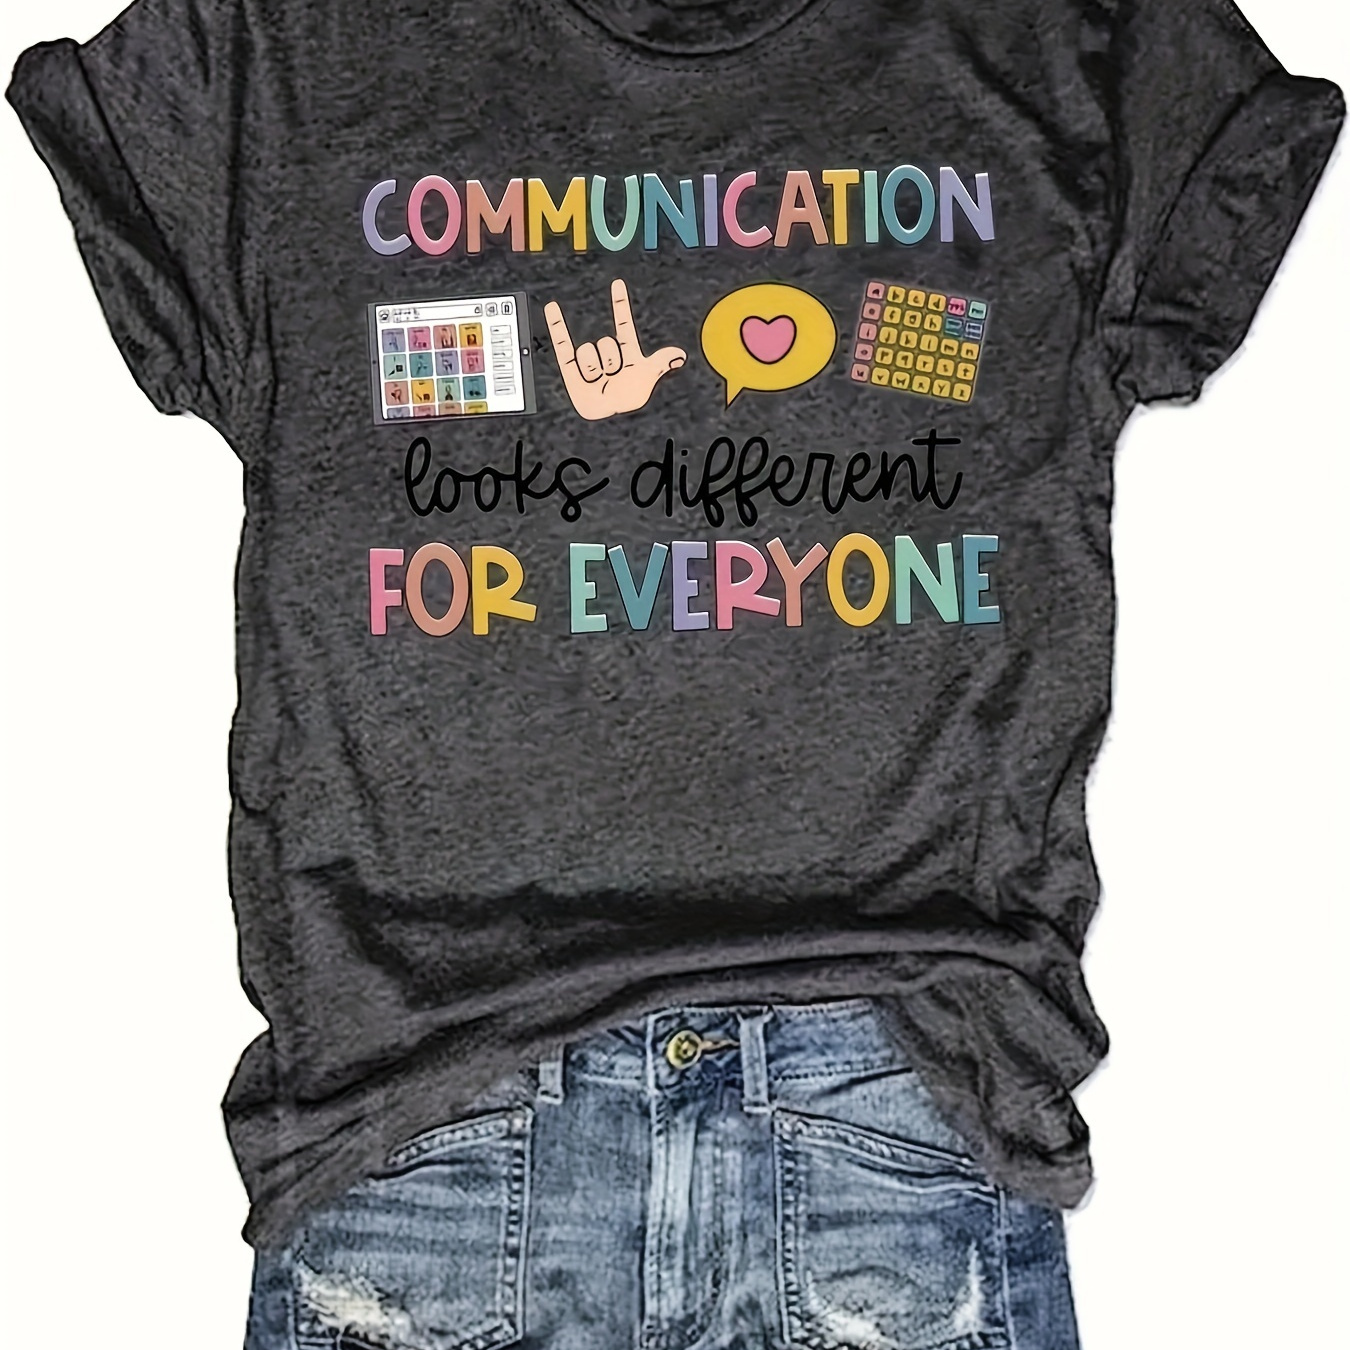 

Communication Print Crew Neck T-shirt, Casual Short Sleeve Top For Spring & Summer, Women's Clothing